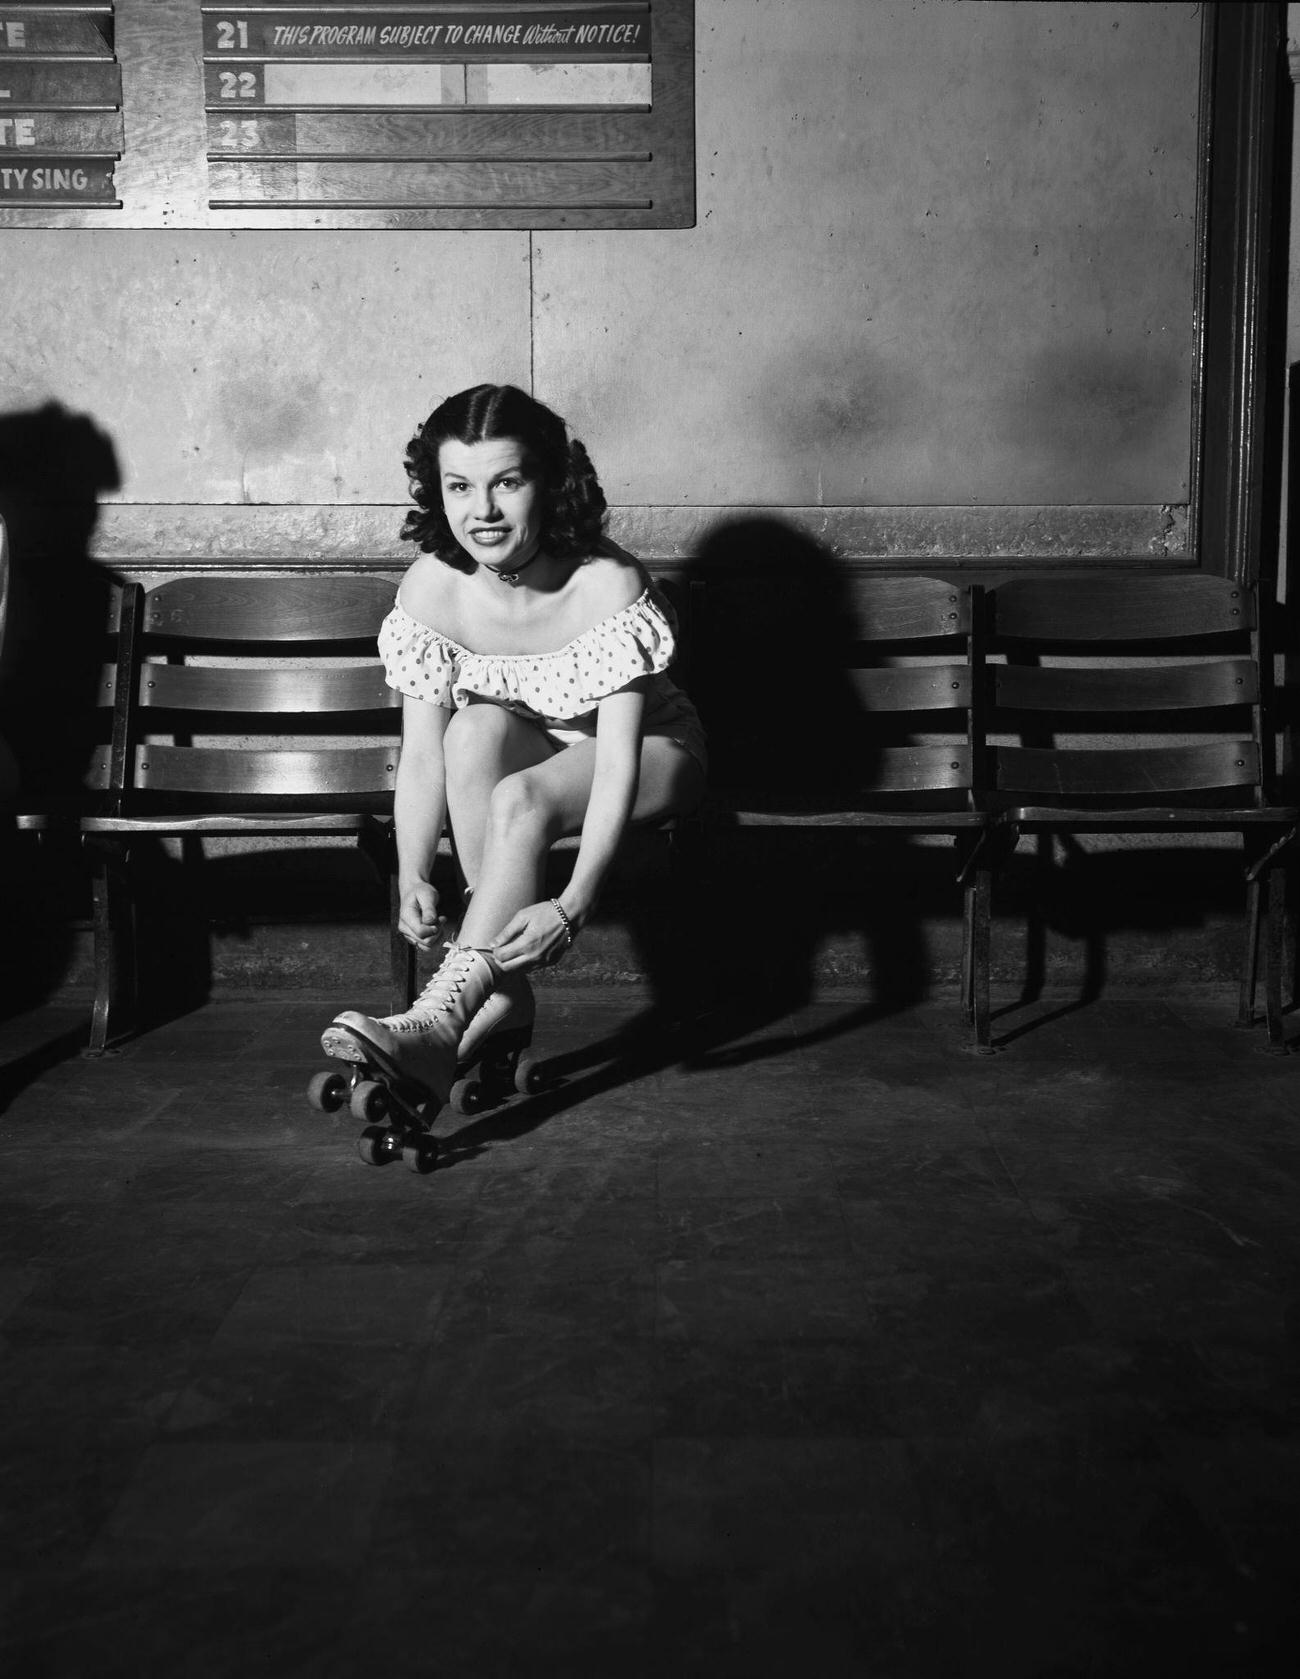 Young Woman Putting on Roller Skates at a Rink, USA, circa 1950